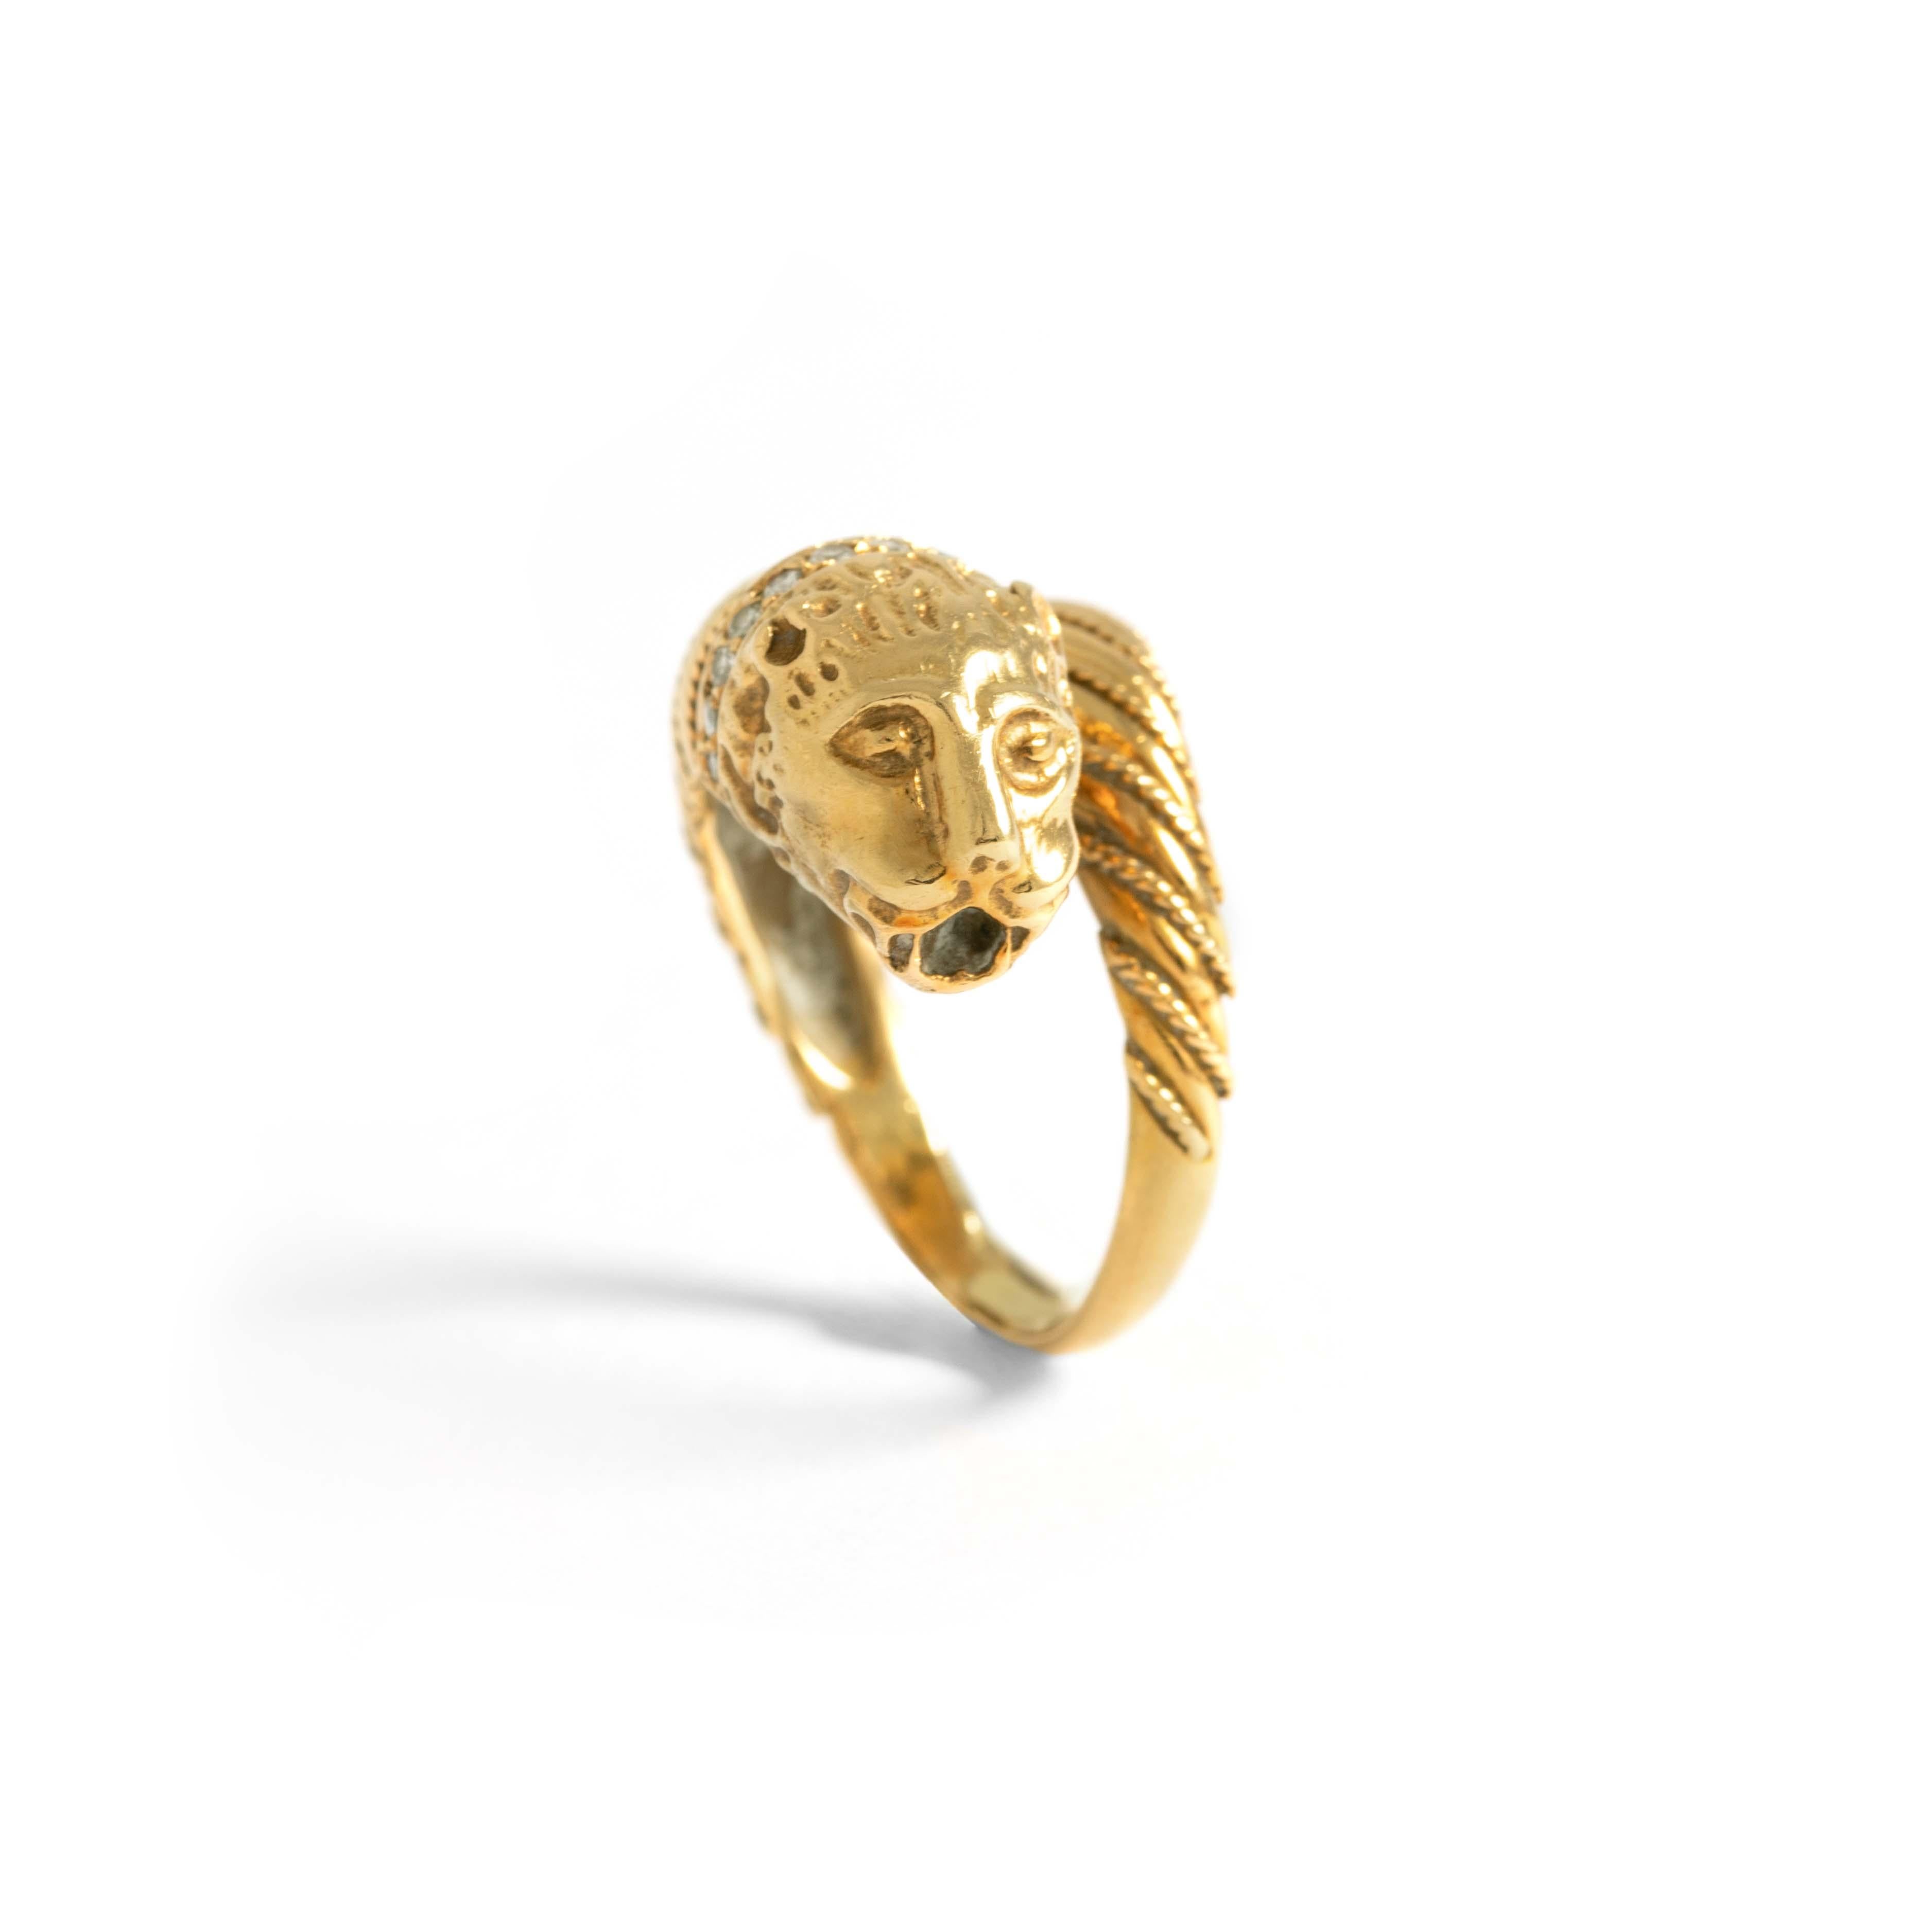 18K yellow gold ring with white stones representing a lion's head.
Weight: 9.13 grams.